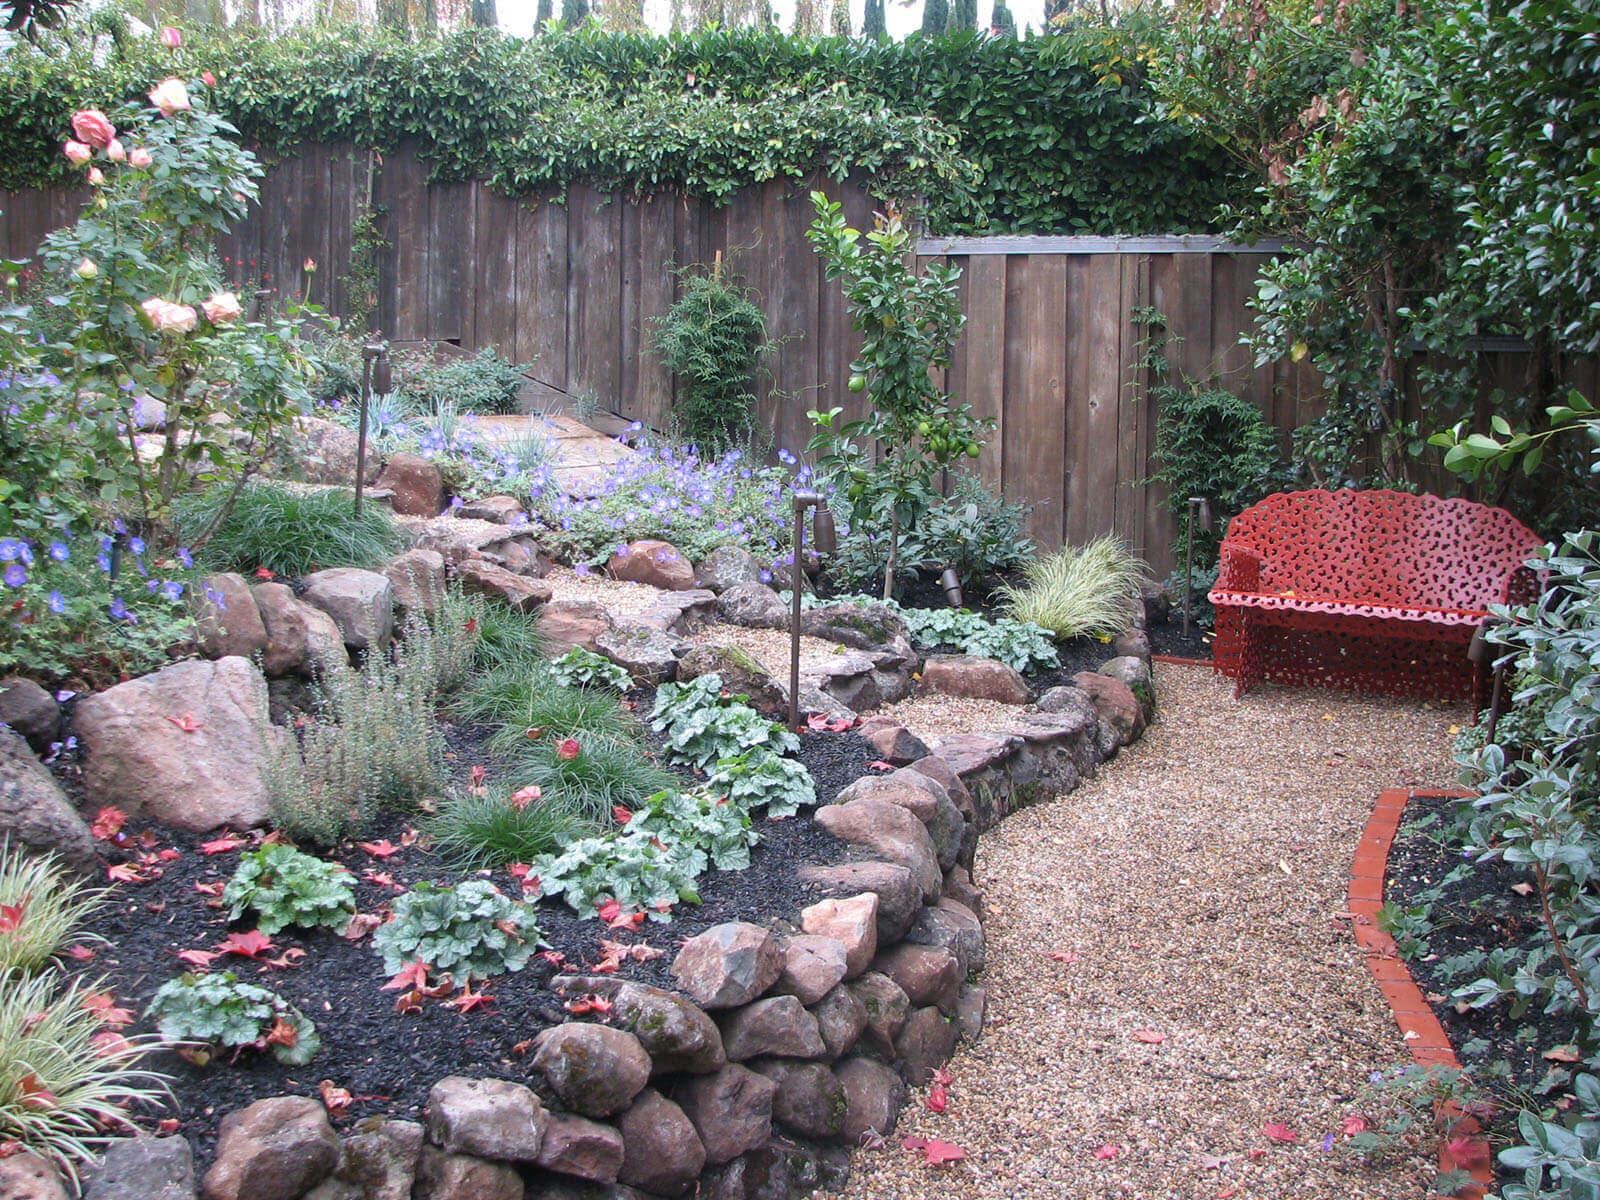 Stone path staged garden with accent red painted bench, and roses